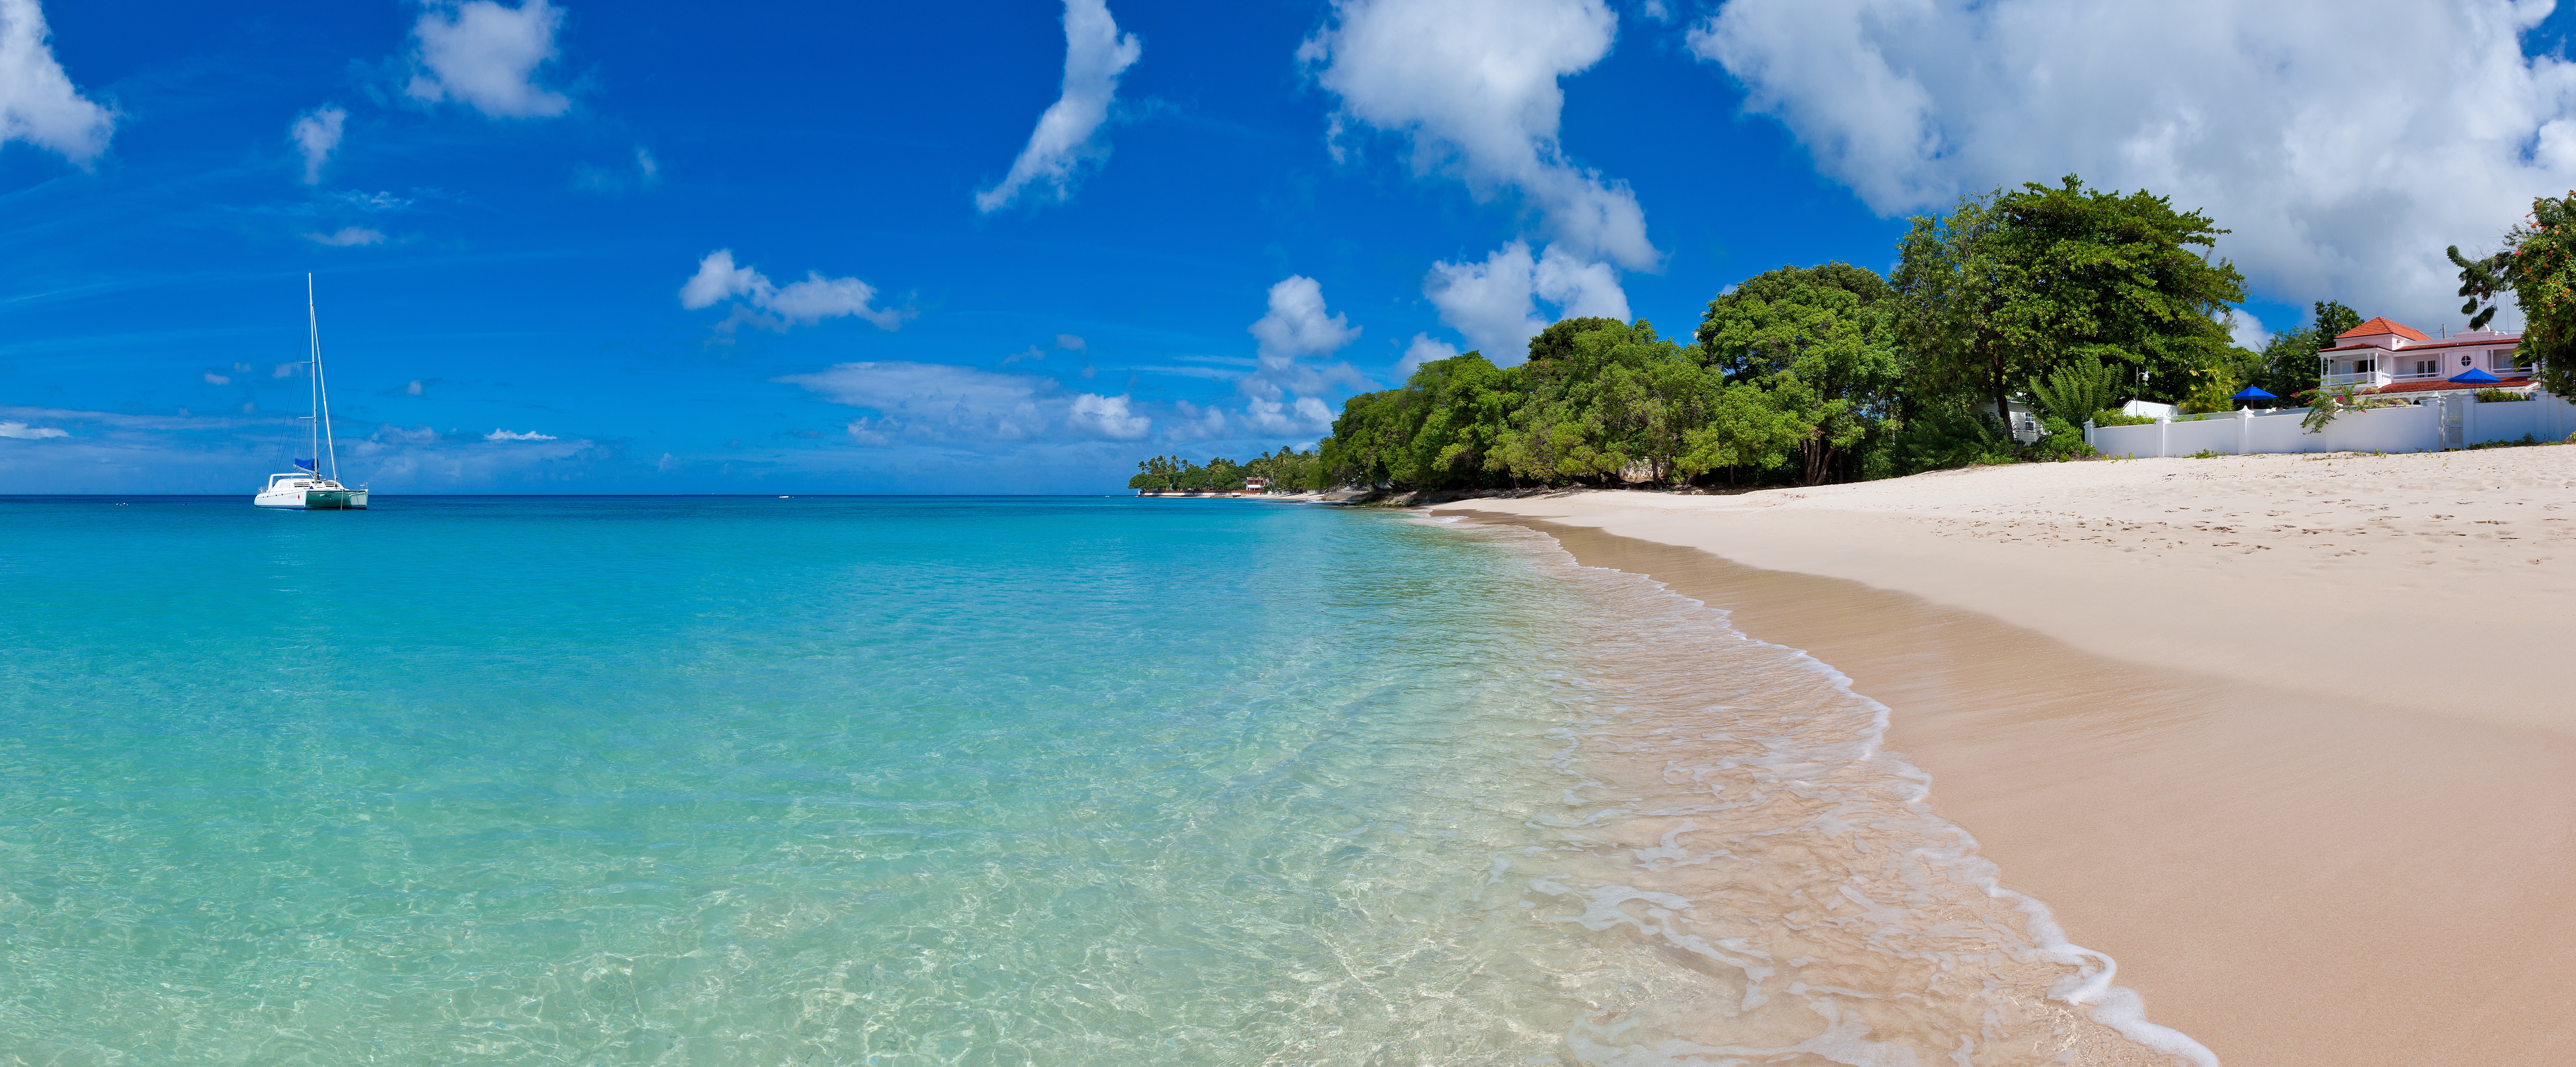 Vacation In Barbados - When should you go and where. | Blog | Realtors